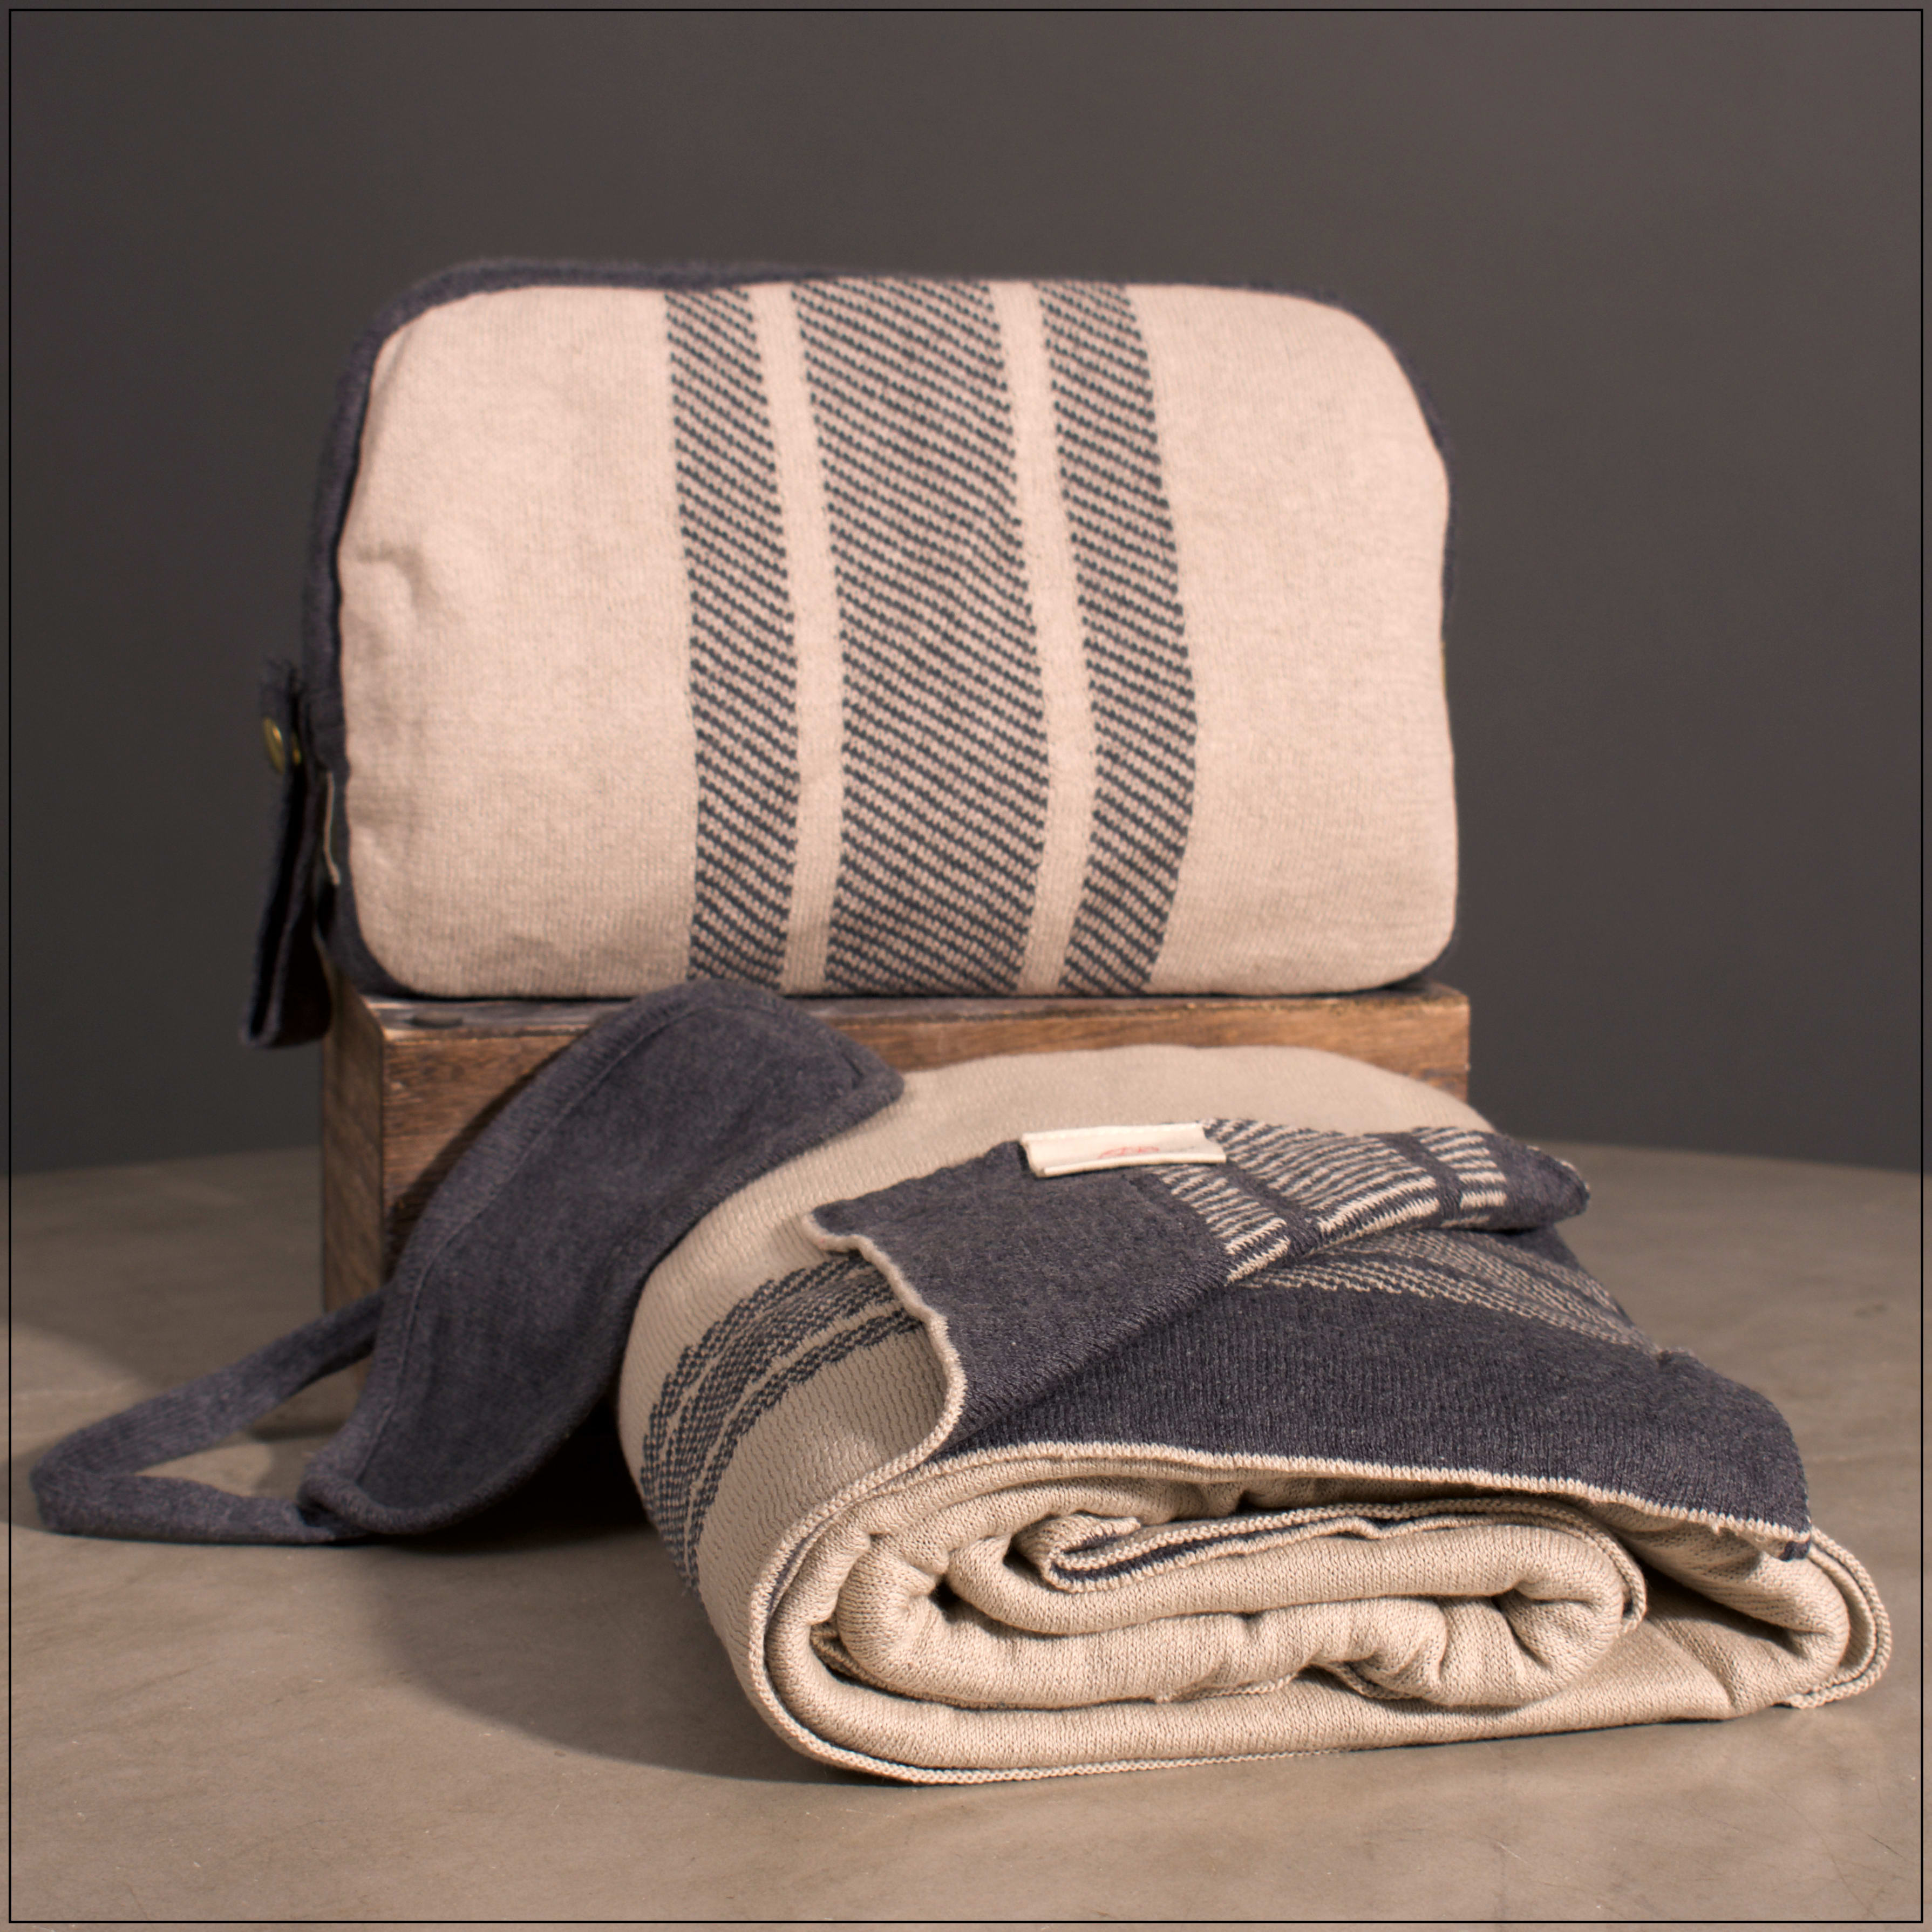 Beige/ Grey Reversible Travel Blanket  - Size 40 inches x 60 inches  Fabric 100% Combed Cotton Azo-free OEKO-TEX Certified